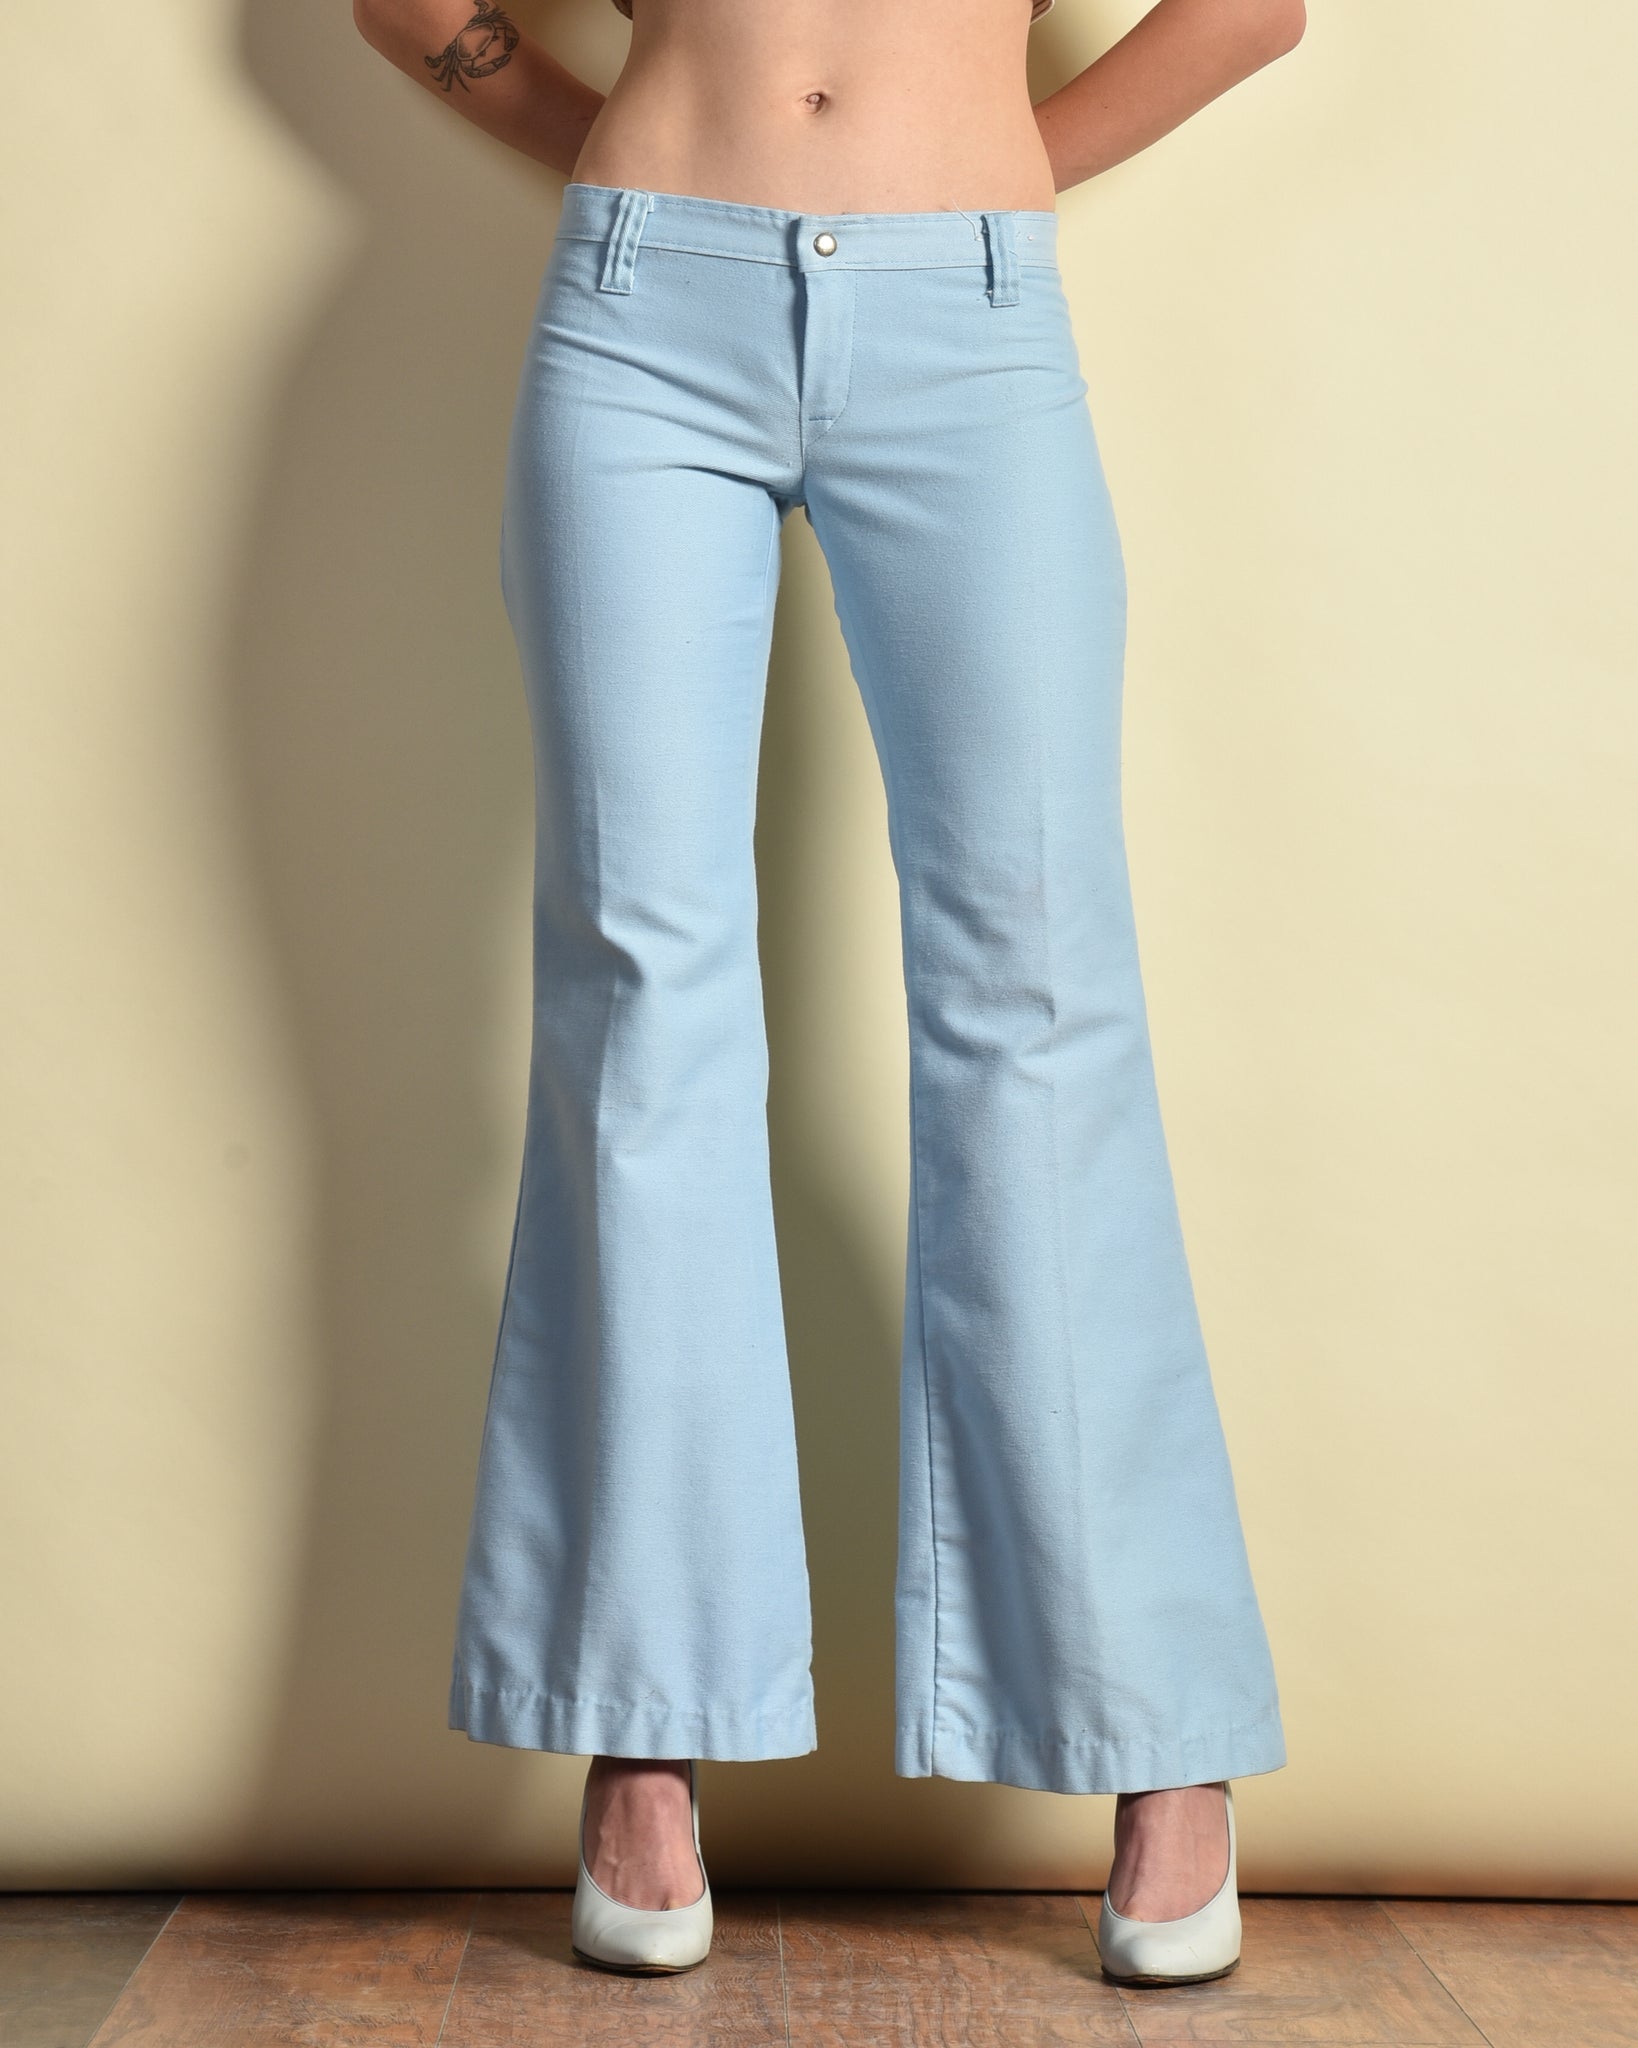 Dittos 1970s Low Rise Bell Bottom Jeans